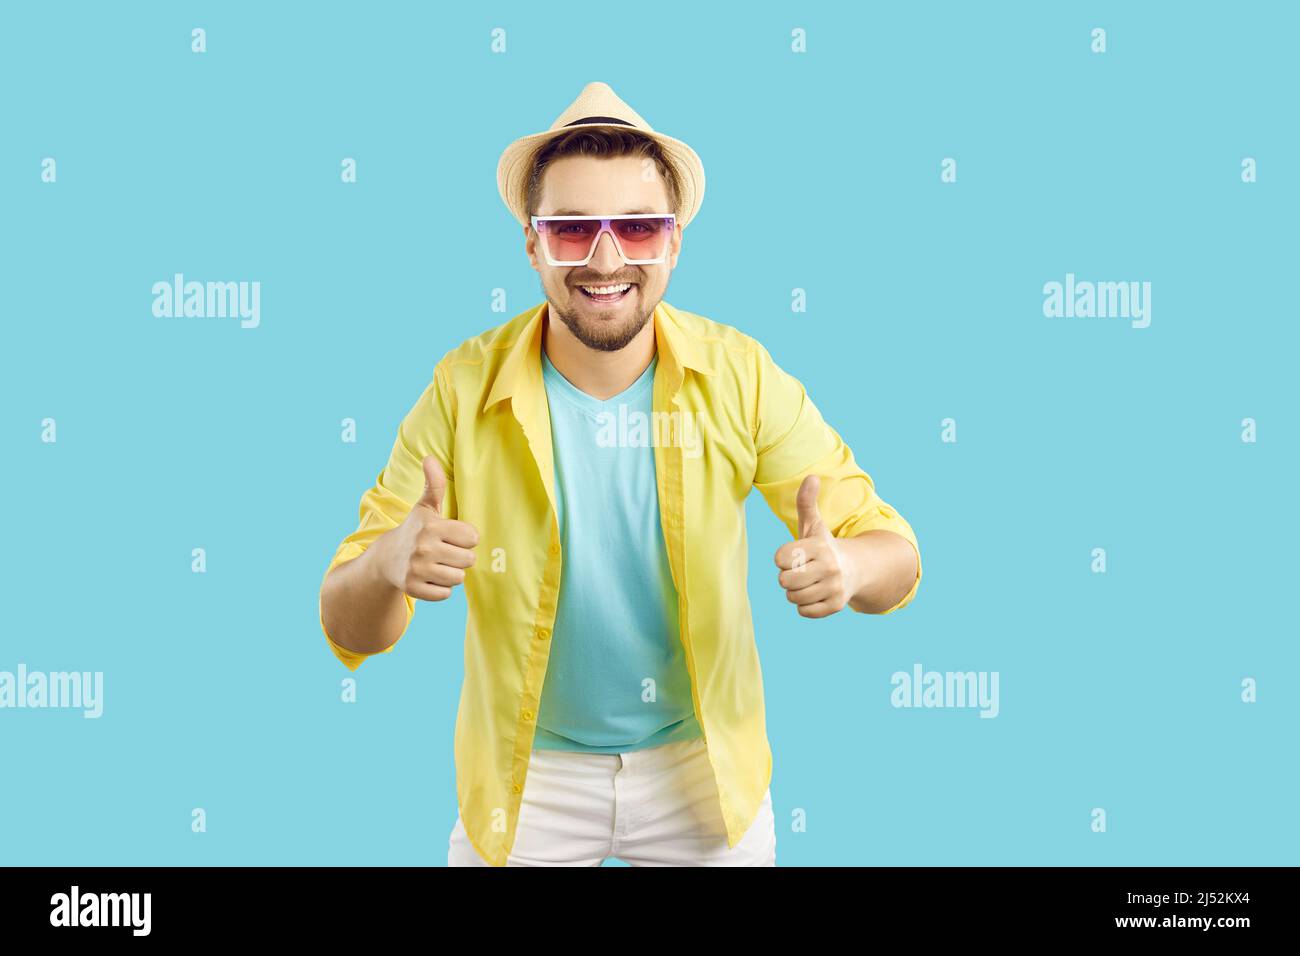 Happy man who is satisfied with his summer holiday smiling and showing thumbs up Stock Photo